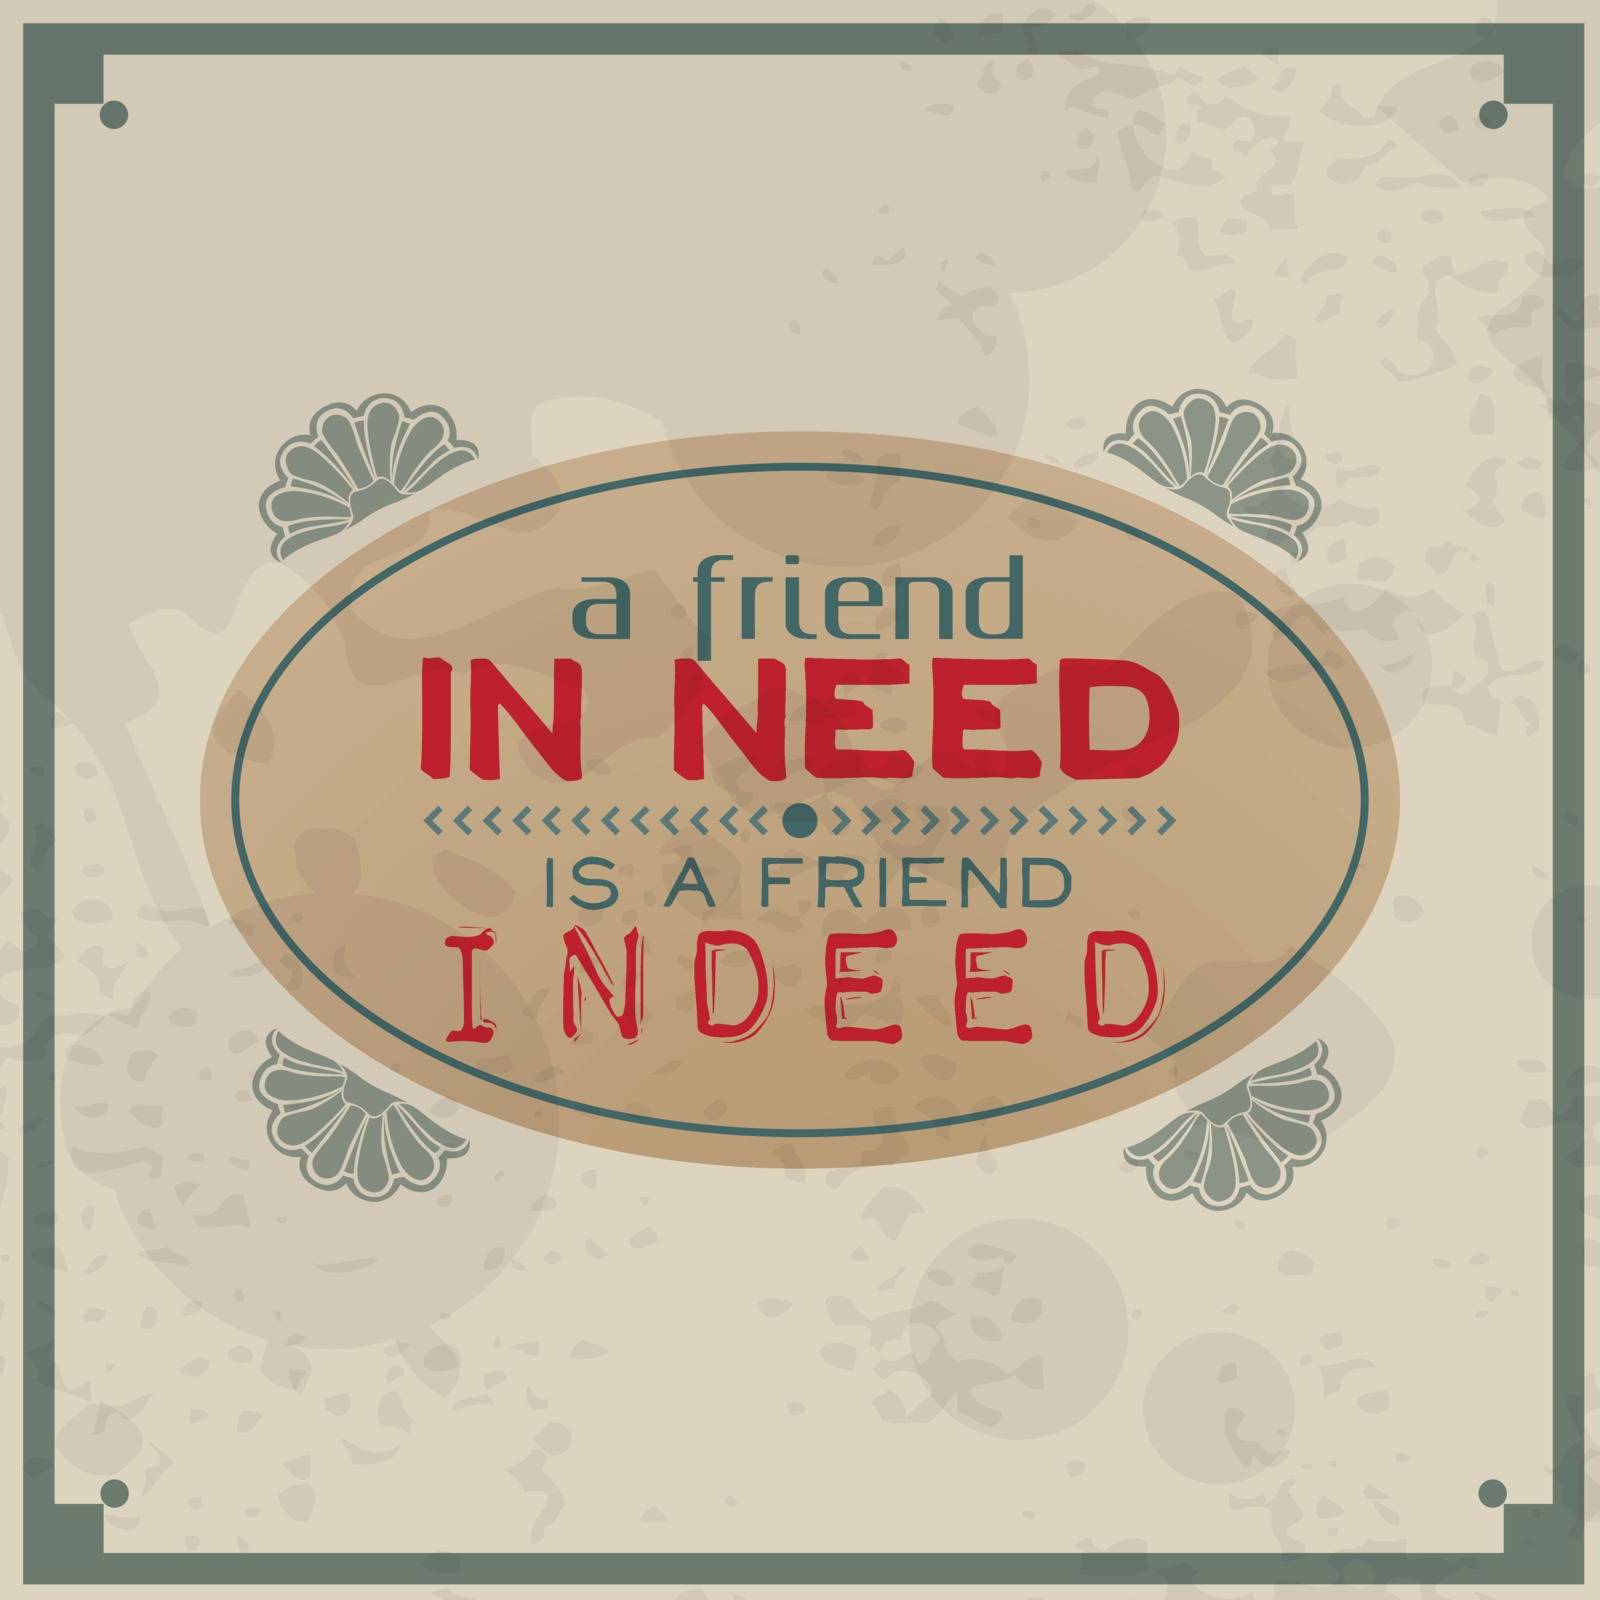 A friend in need is a friend indeed.Vintage Typographic Background. Motivational Quote. Retro Label With Calligraphic Elements